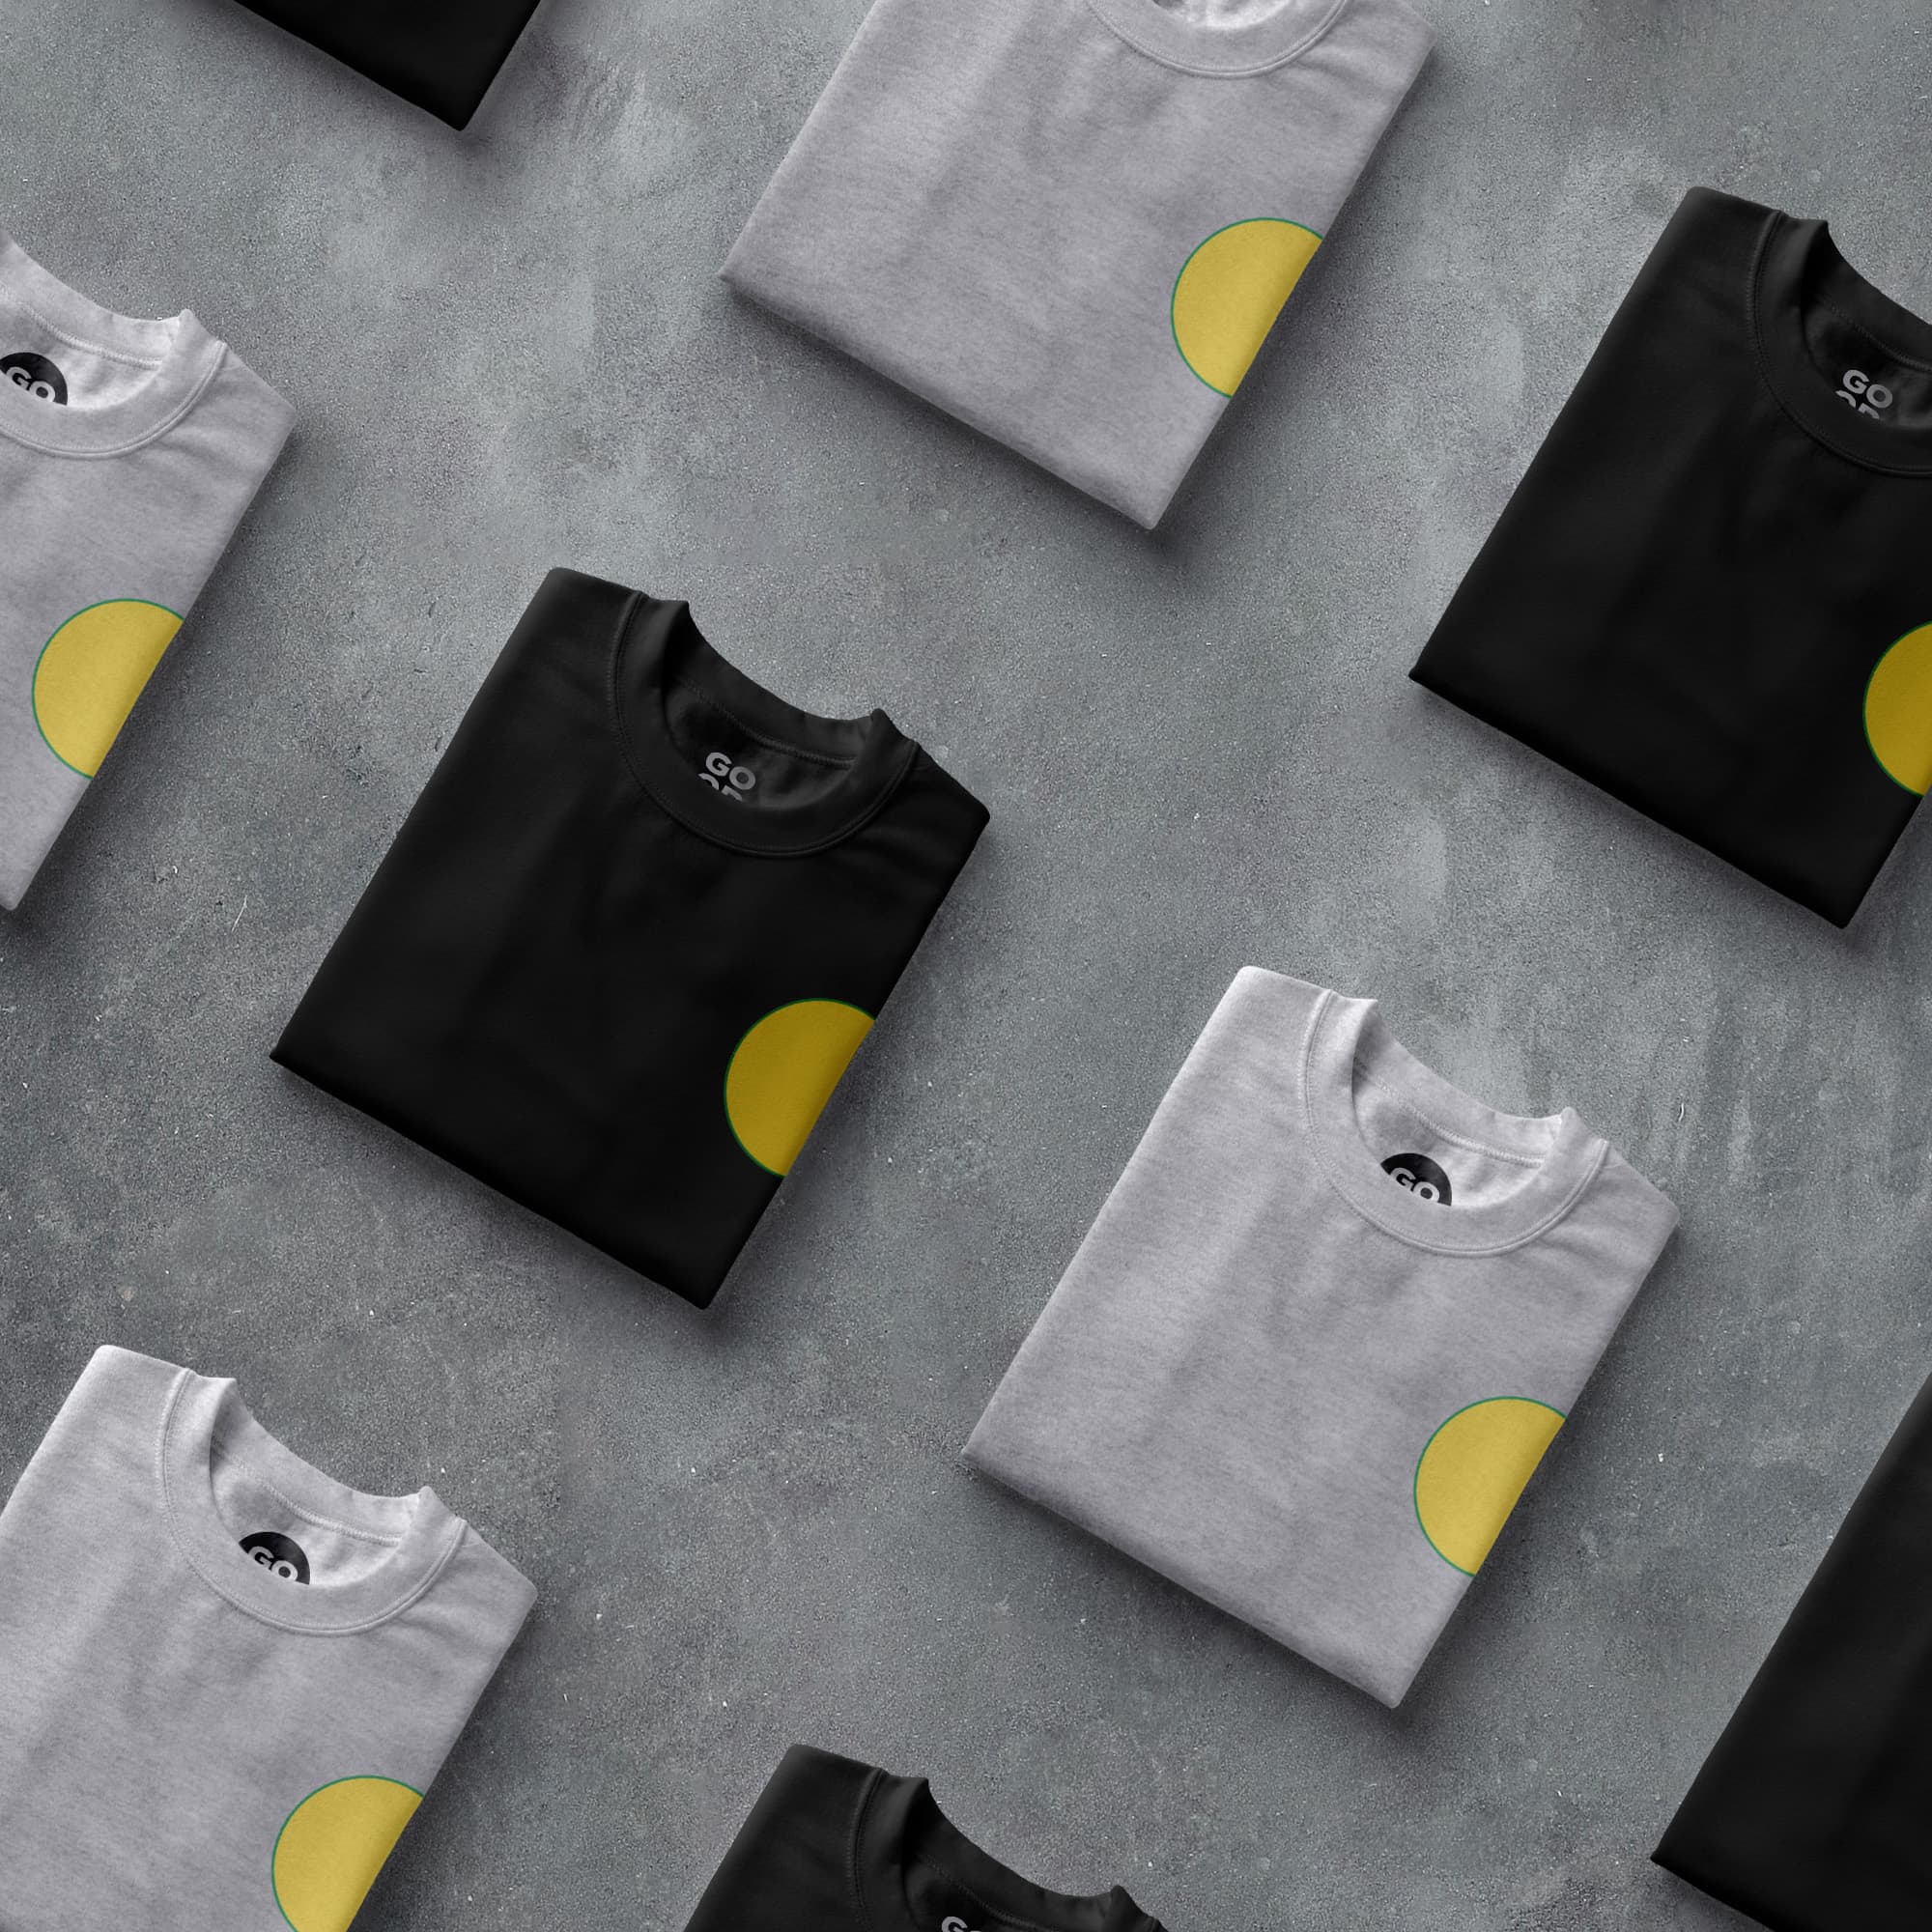 a group of black and white shirts with yellow circles on them